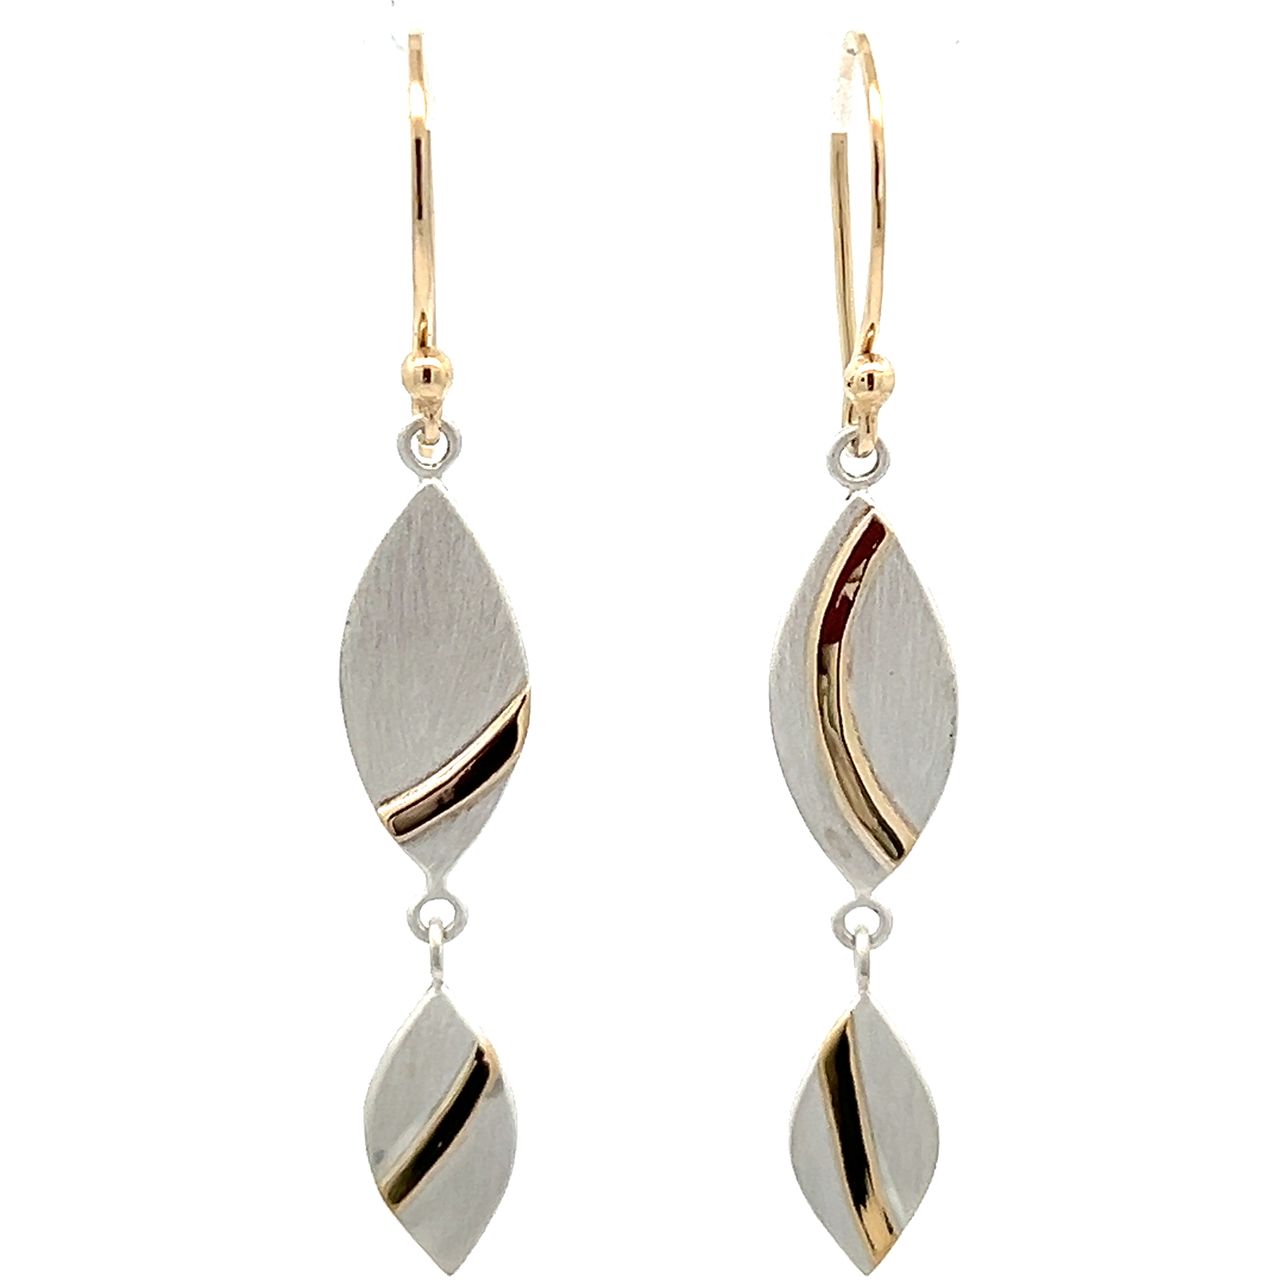 Satin Finish Sterling Silver and 14k Yellow Gold Pathways Earrings by Paul Richter